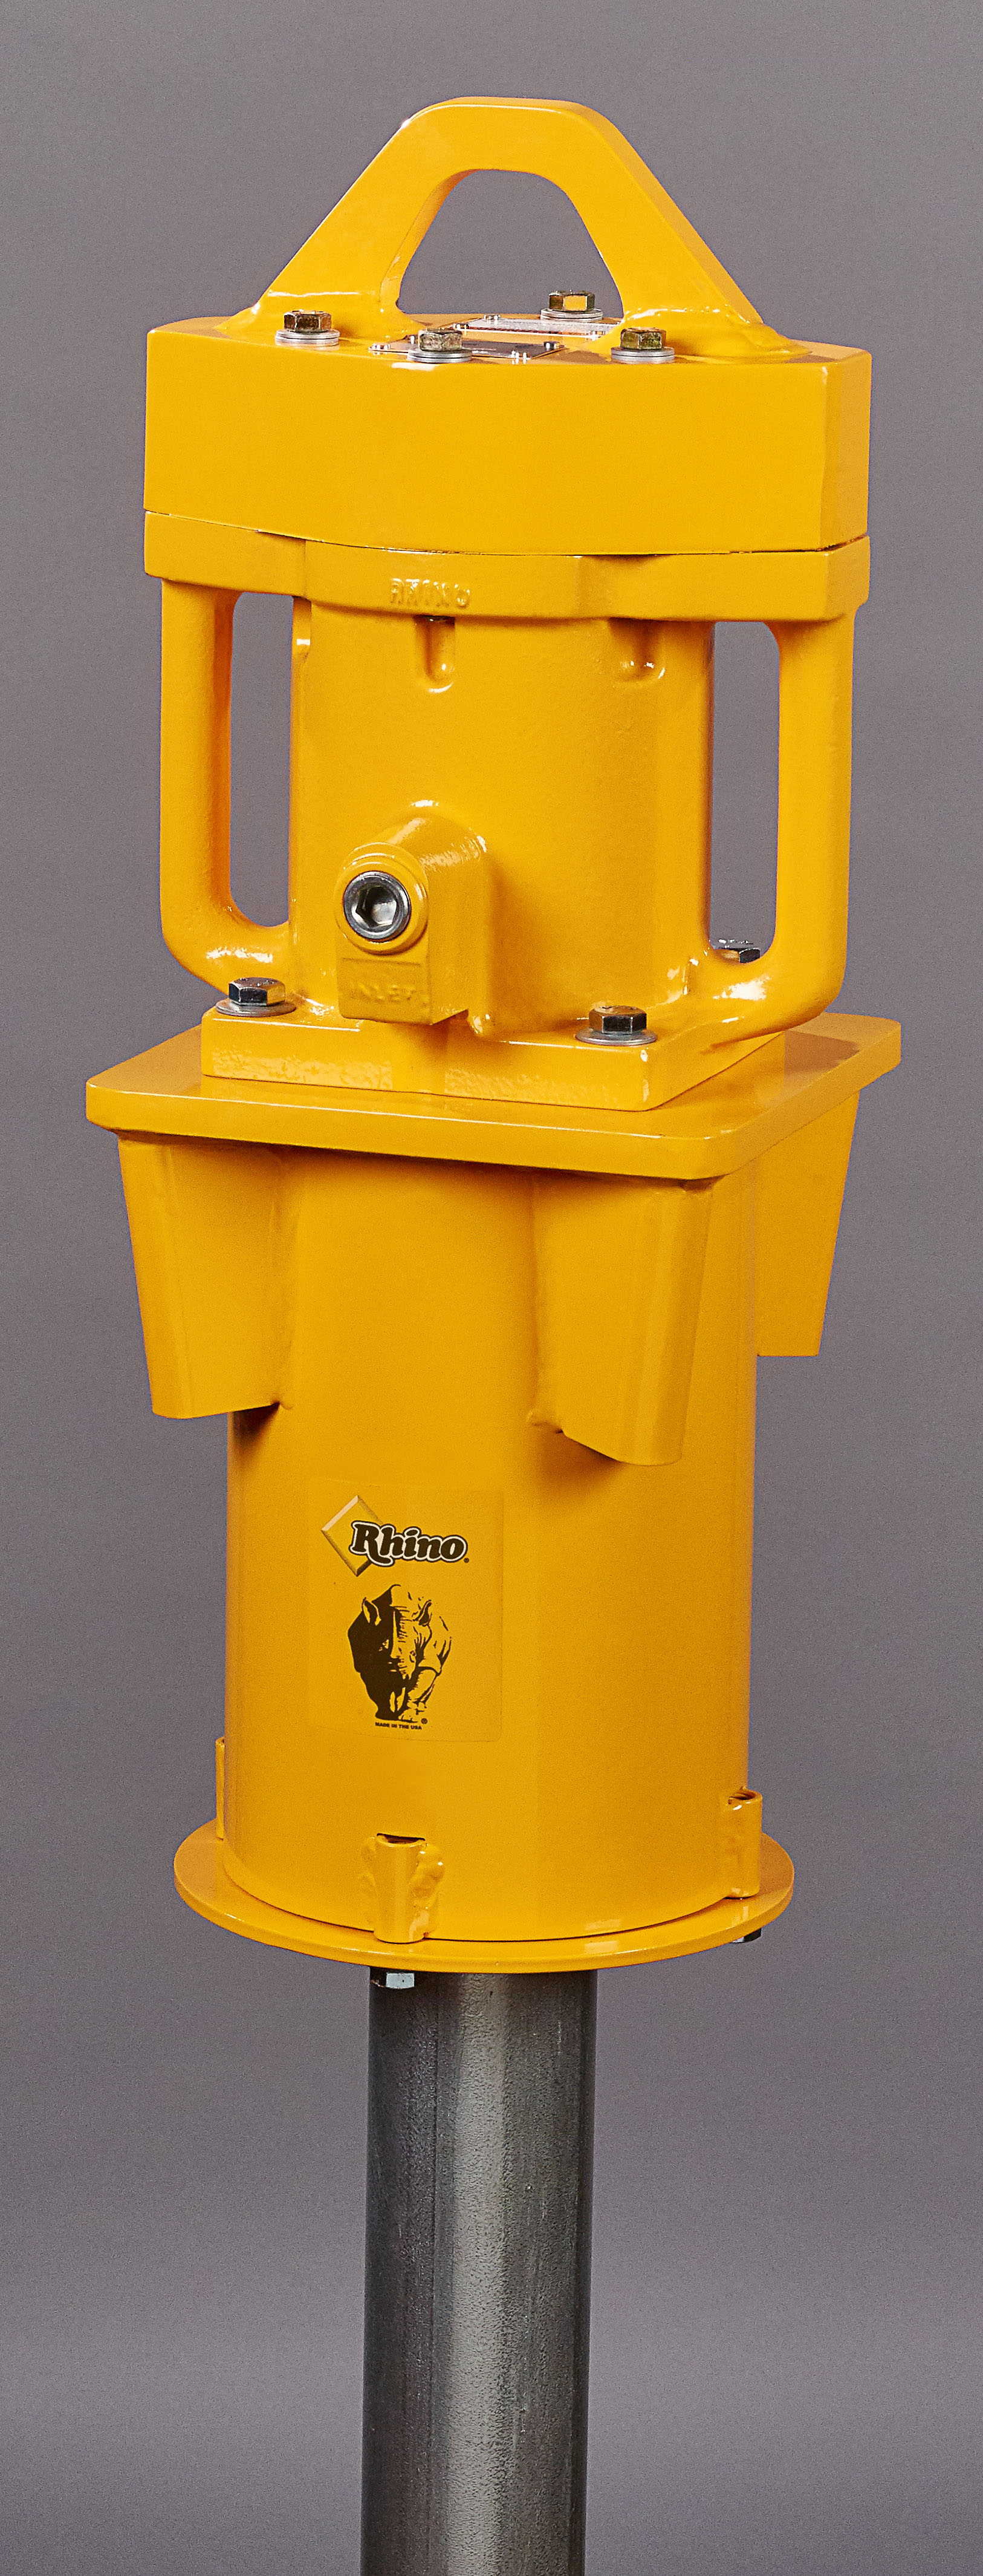 Rhino PD-200 HD Post Driver with 6\"x6\" Wood Piling Master Chuck